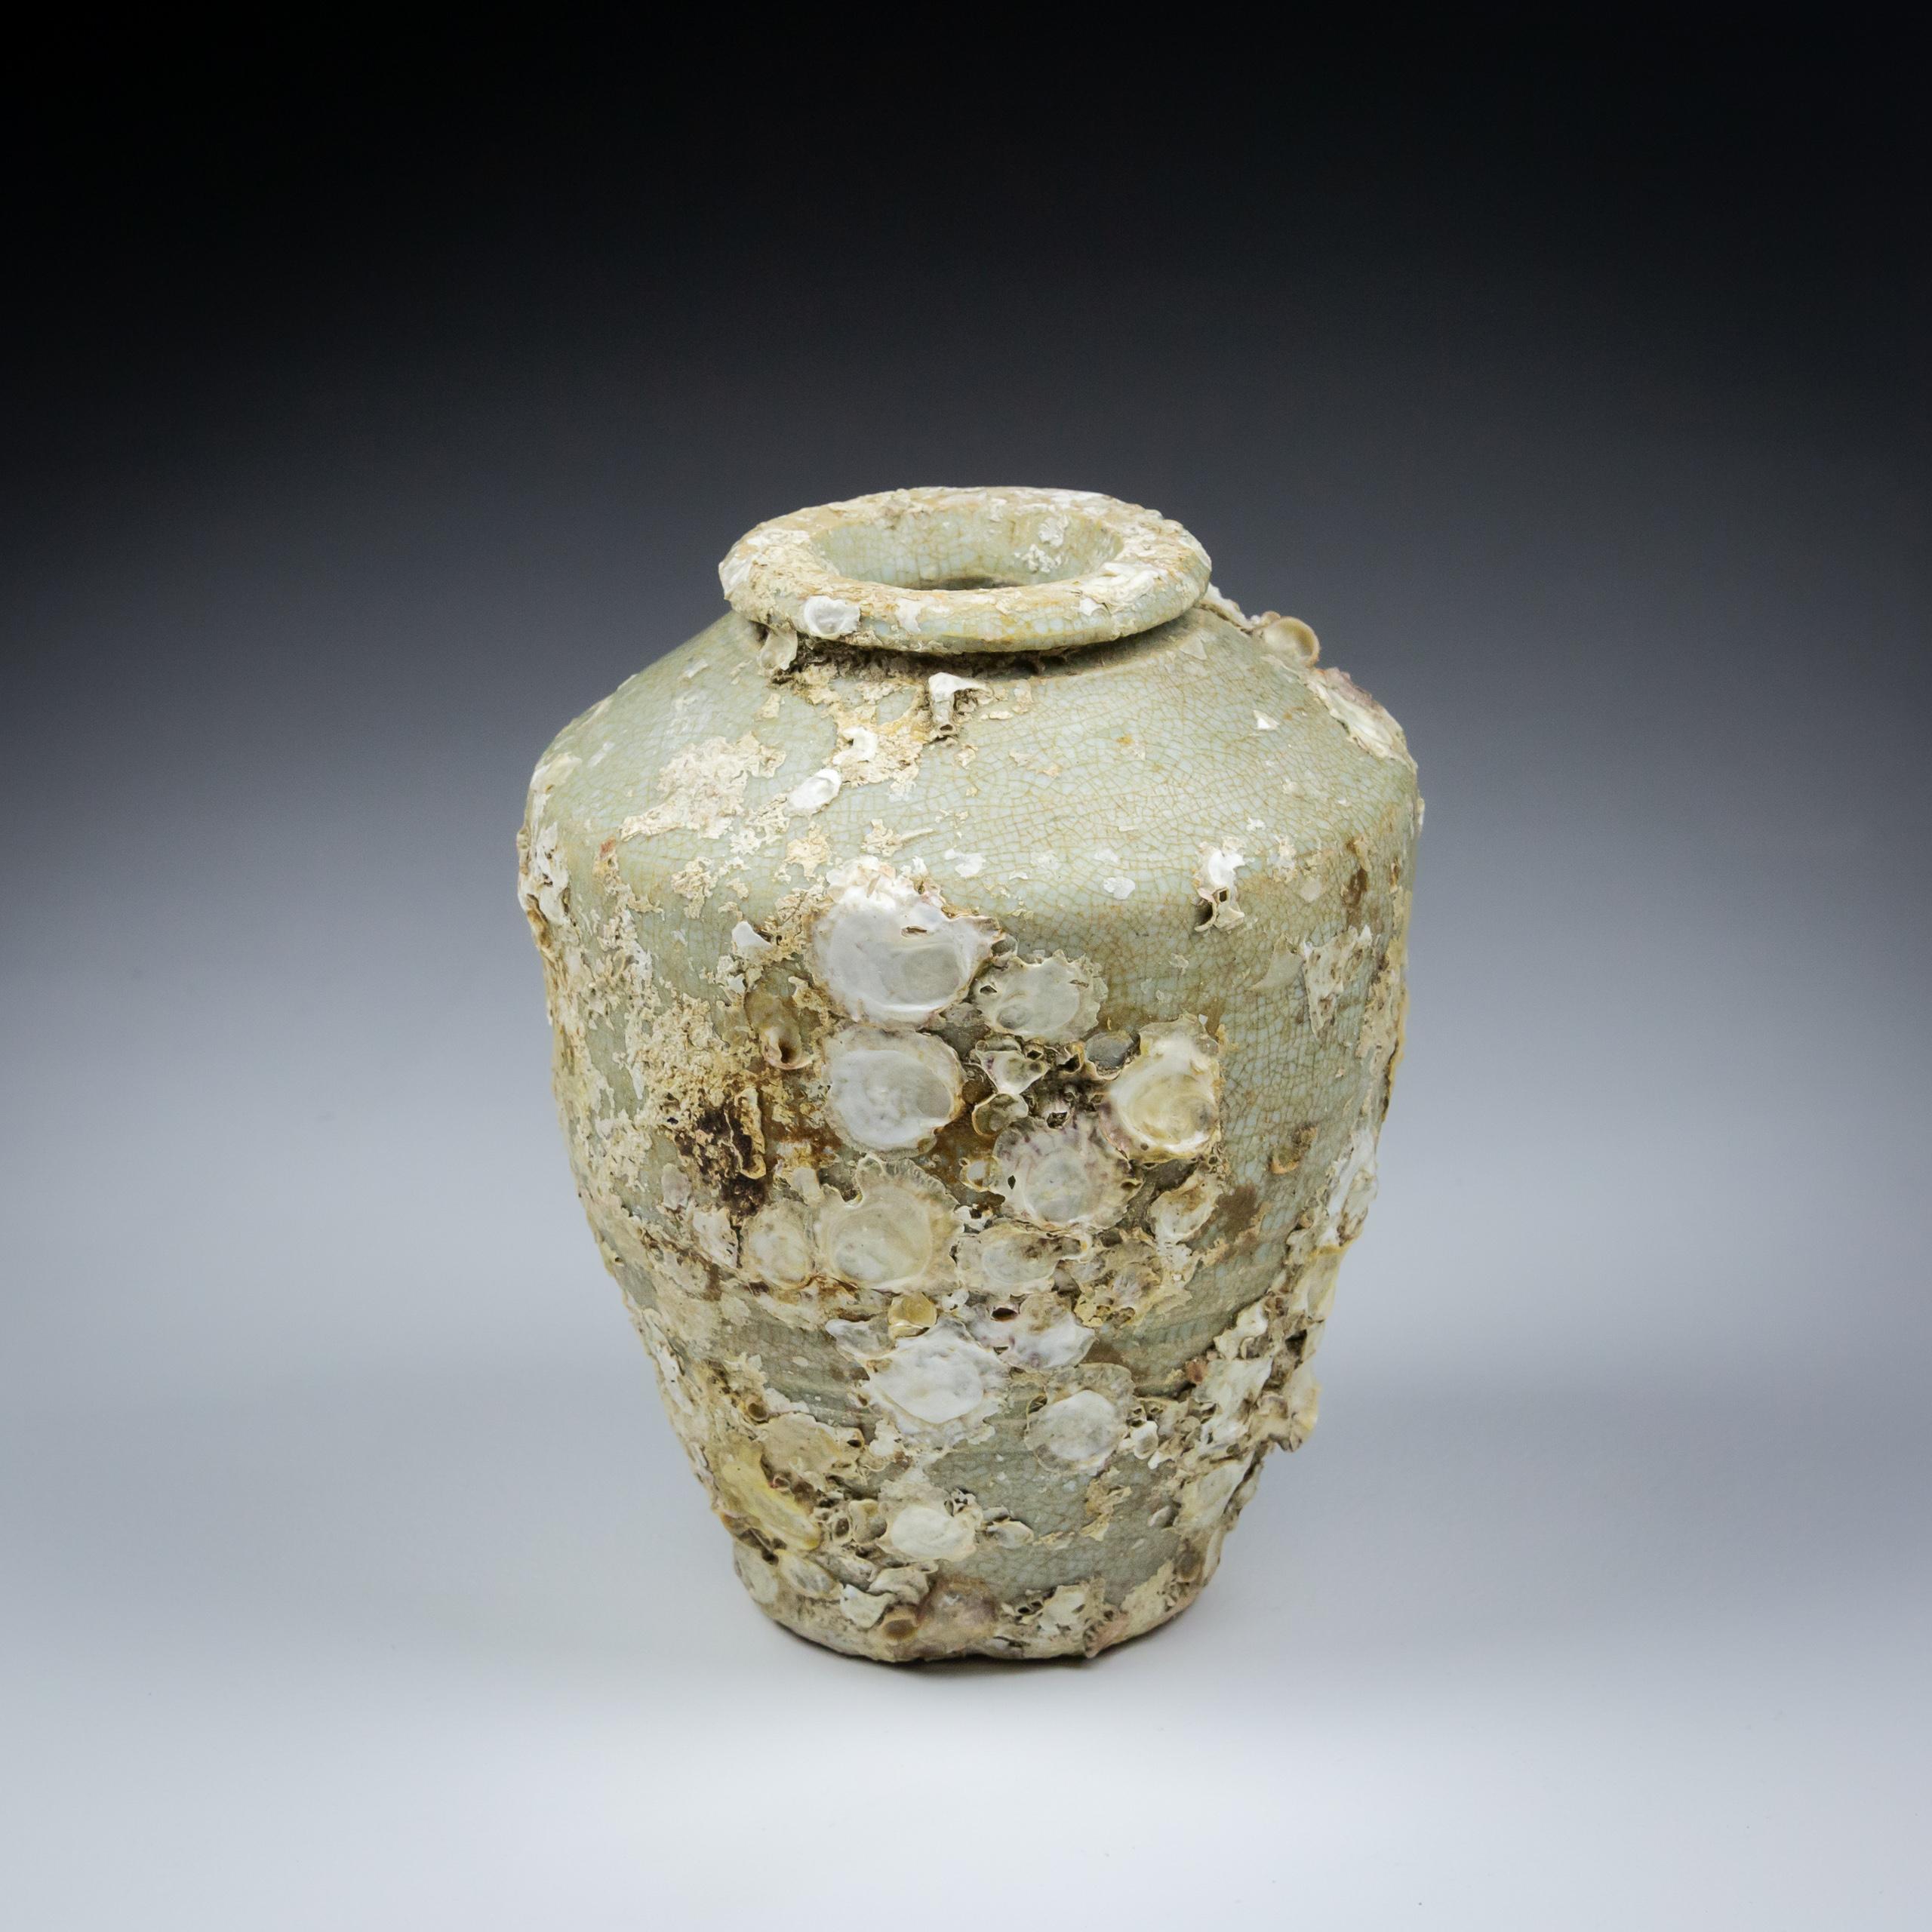 17th Century crackle glazed baluster vase, likely for storage of dry food - spices or apothecary. 

Reclaimed Treasure from a Chinese trading vessel wrecked off the coast of Vung Tau, Vietnam Circa 1690.
Likely bound for Dutch trading  port Batavia